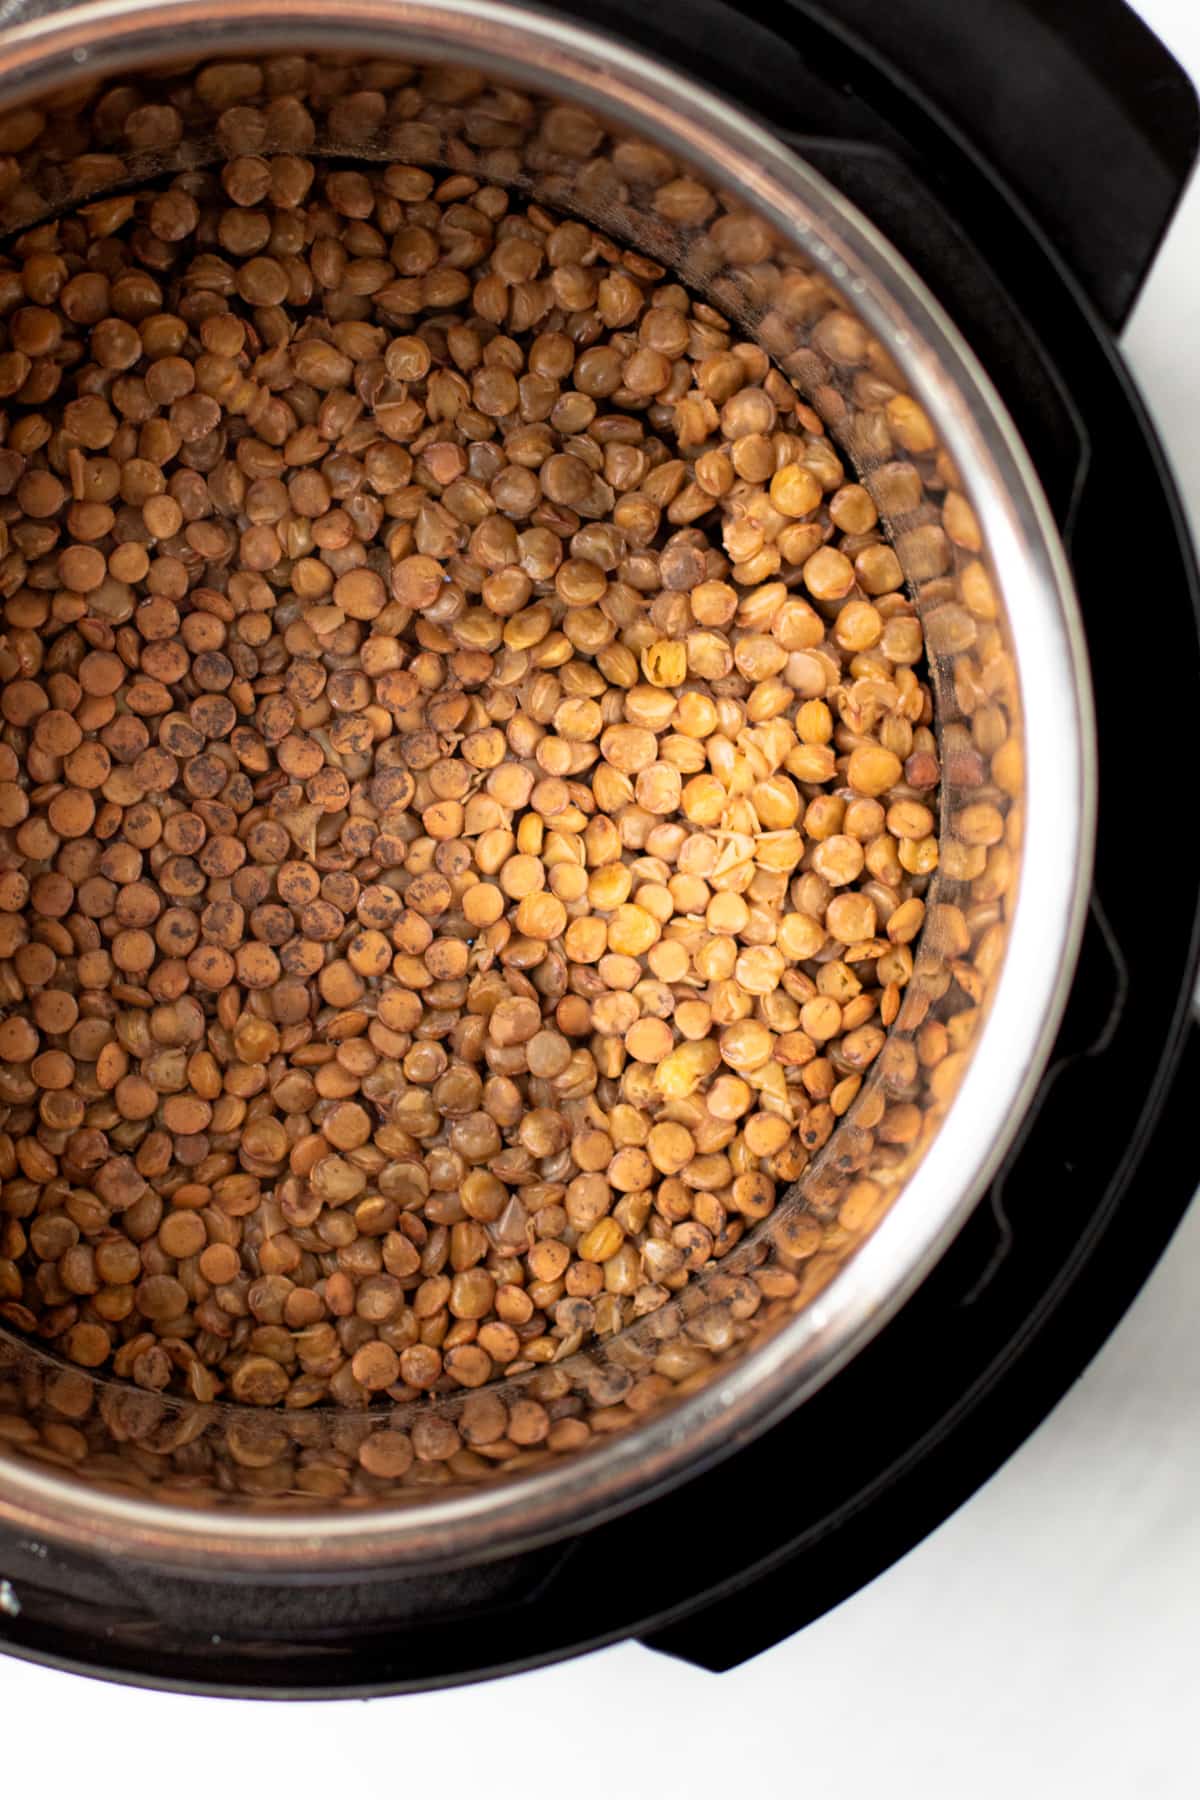 Cooked lentils in an Instant Pot.